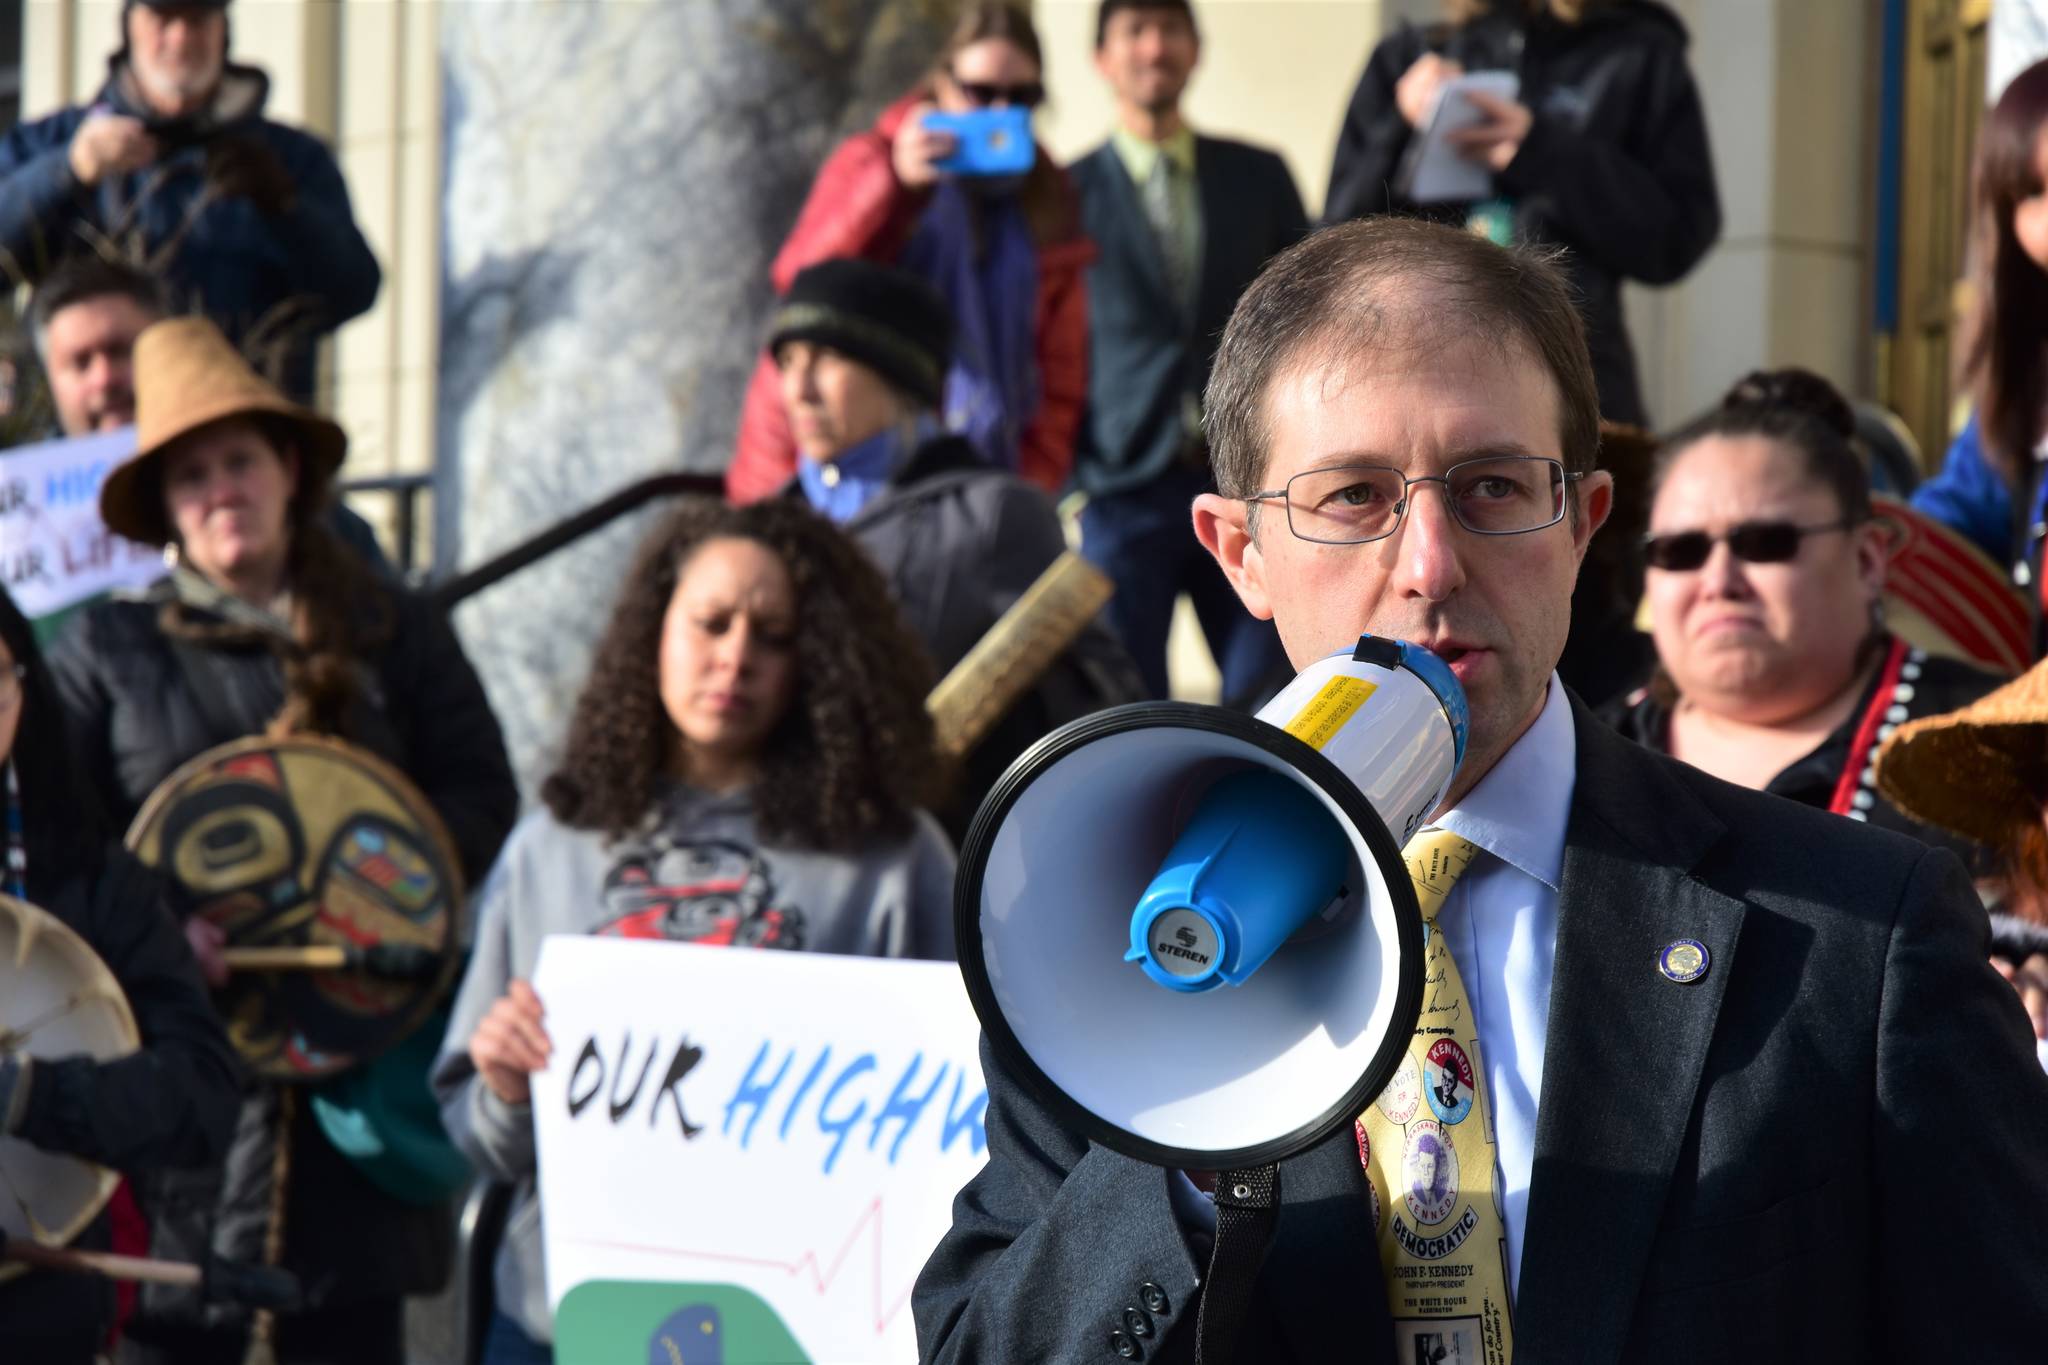 Sen. Jesse Kiehl, D-Juneau, speaks to the crowd at a rally to support of the Alaska Marine Highway System on Tuesday, Feb. 11, 2020. (Peter Segall | Juneau Empire)